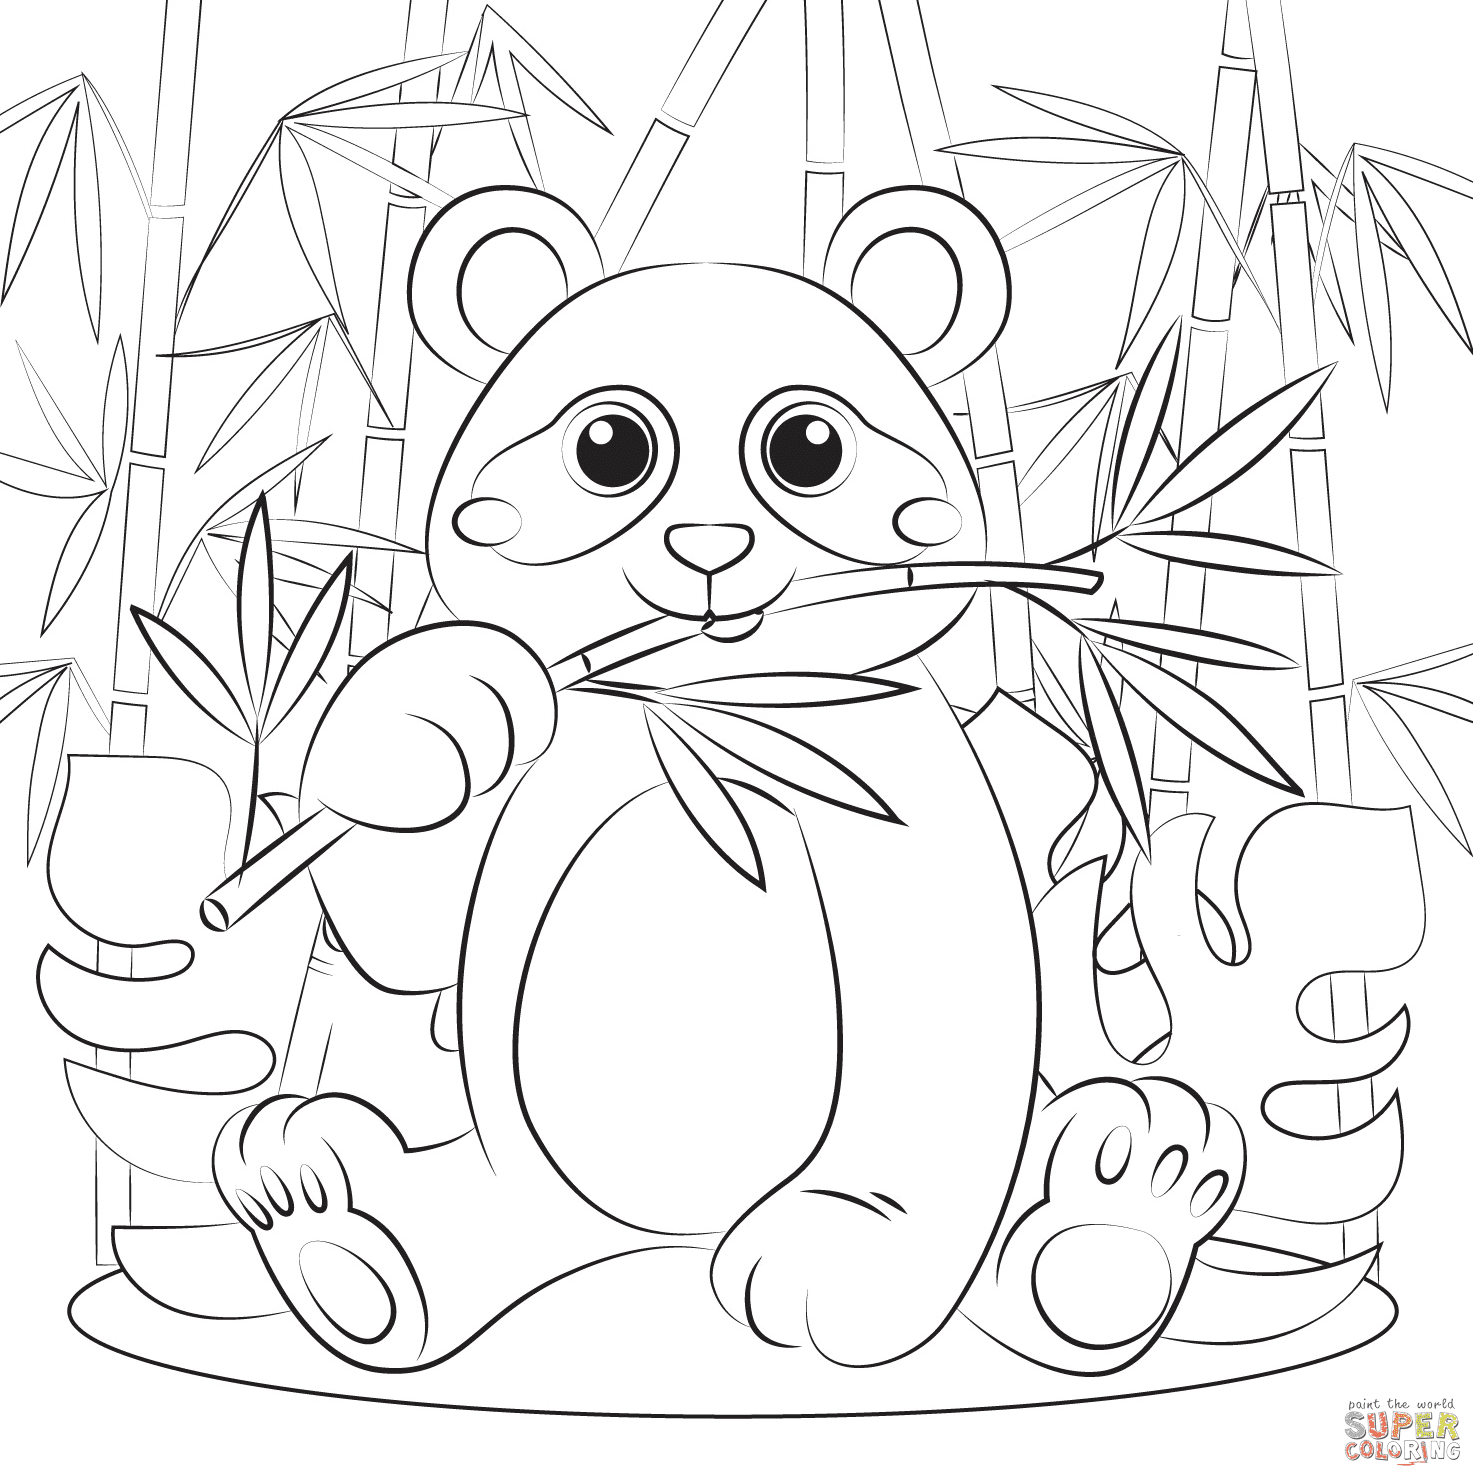 Panda with Bamboo Coloring Pages